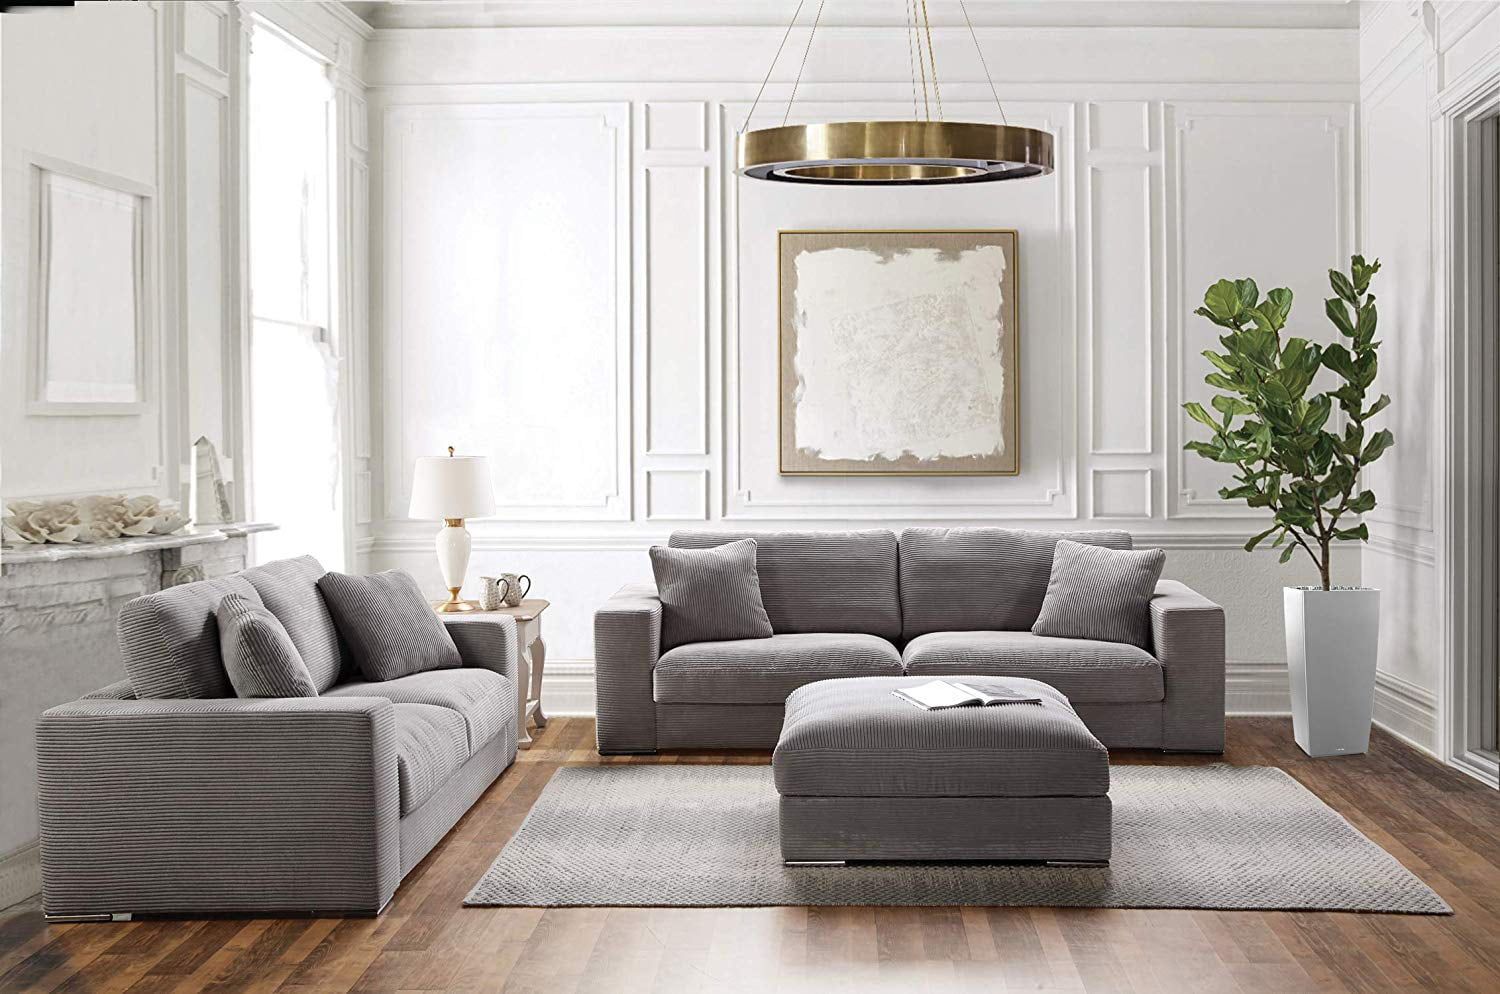 Acanva Luxury Classic Modern Corduroy Living Room Sofa Set 3 Piece With Regard To Sofas In Light Gray (Gallery 6 of 22)